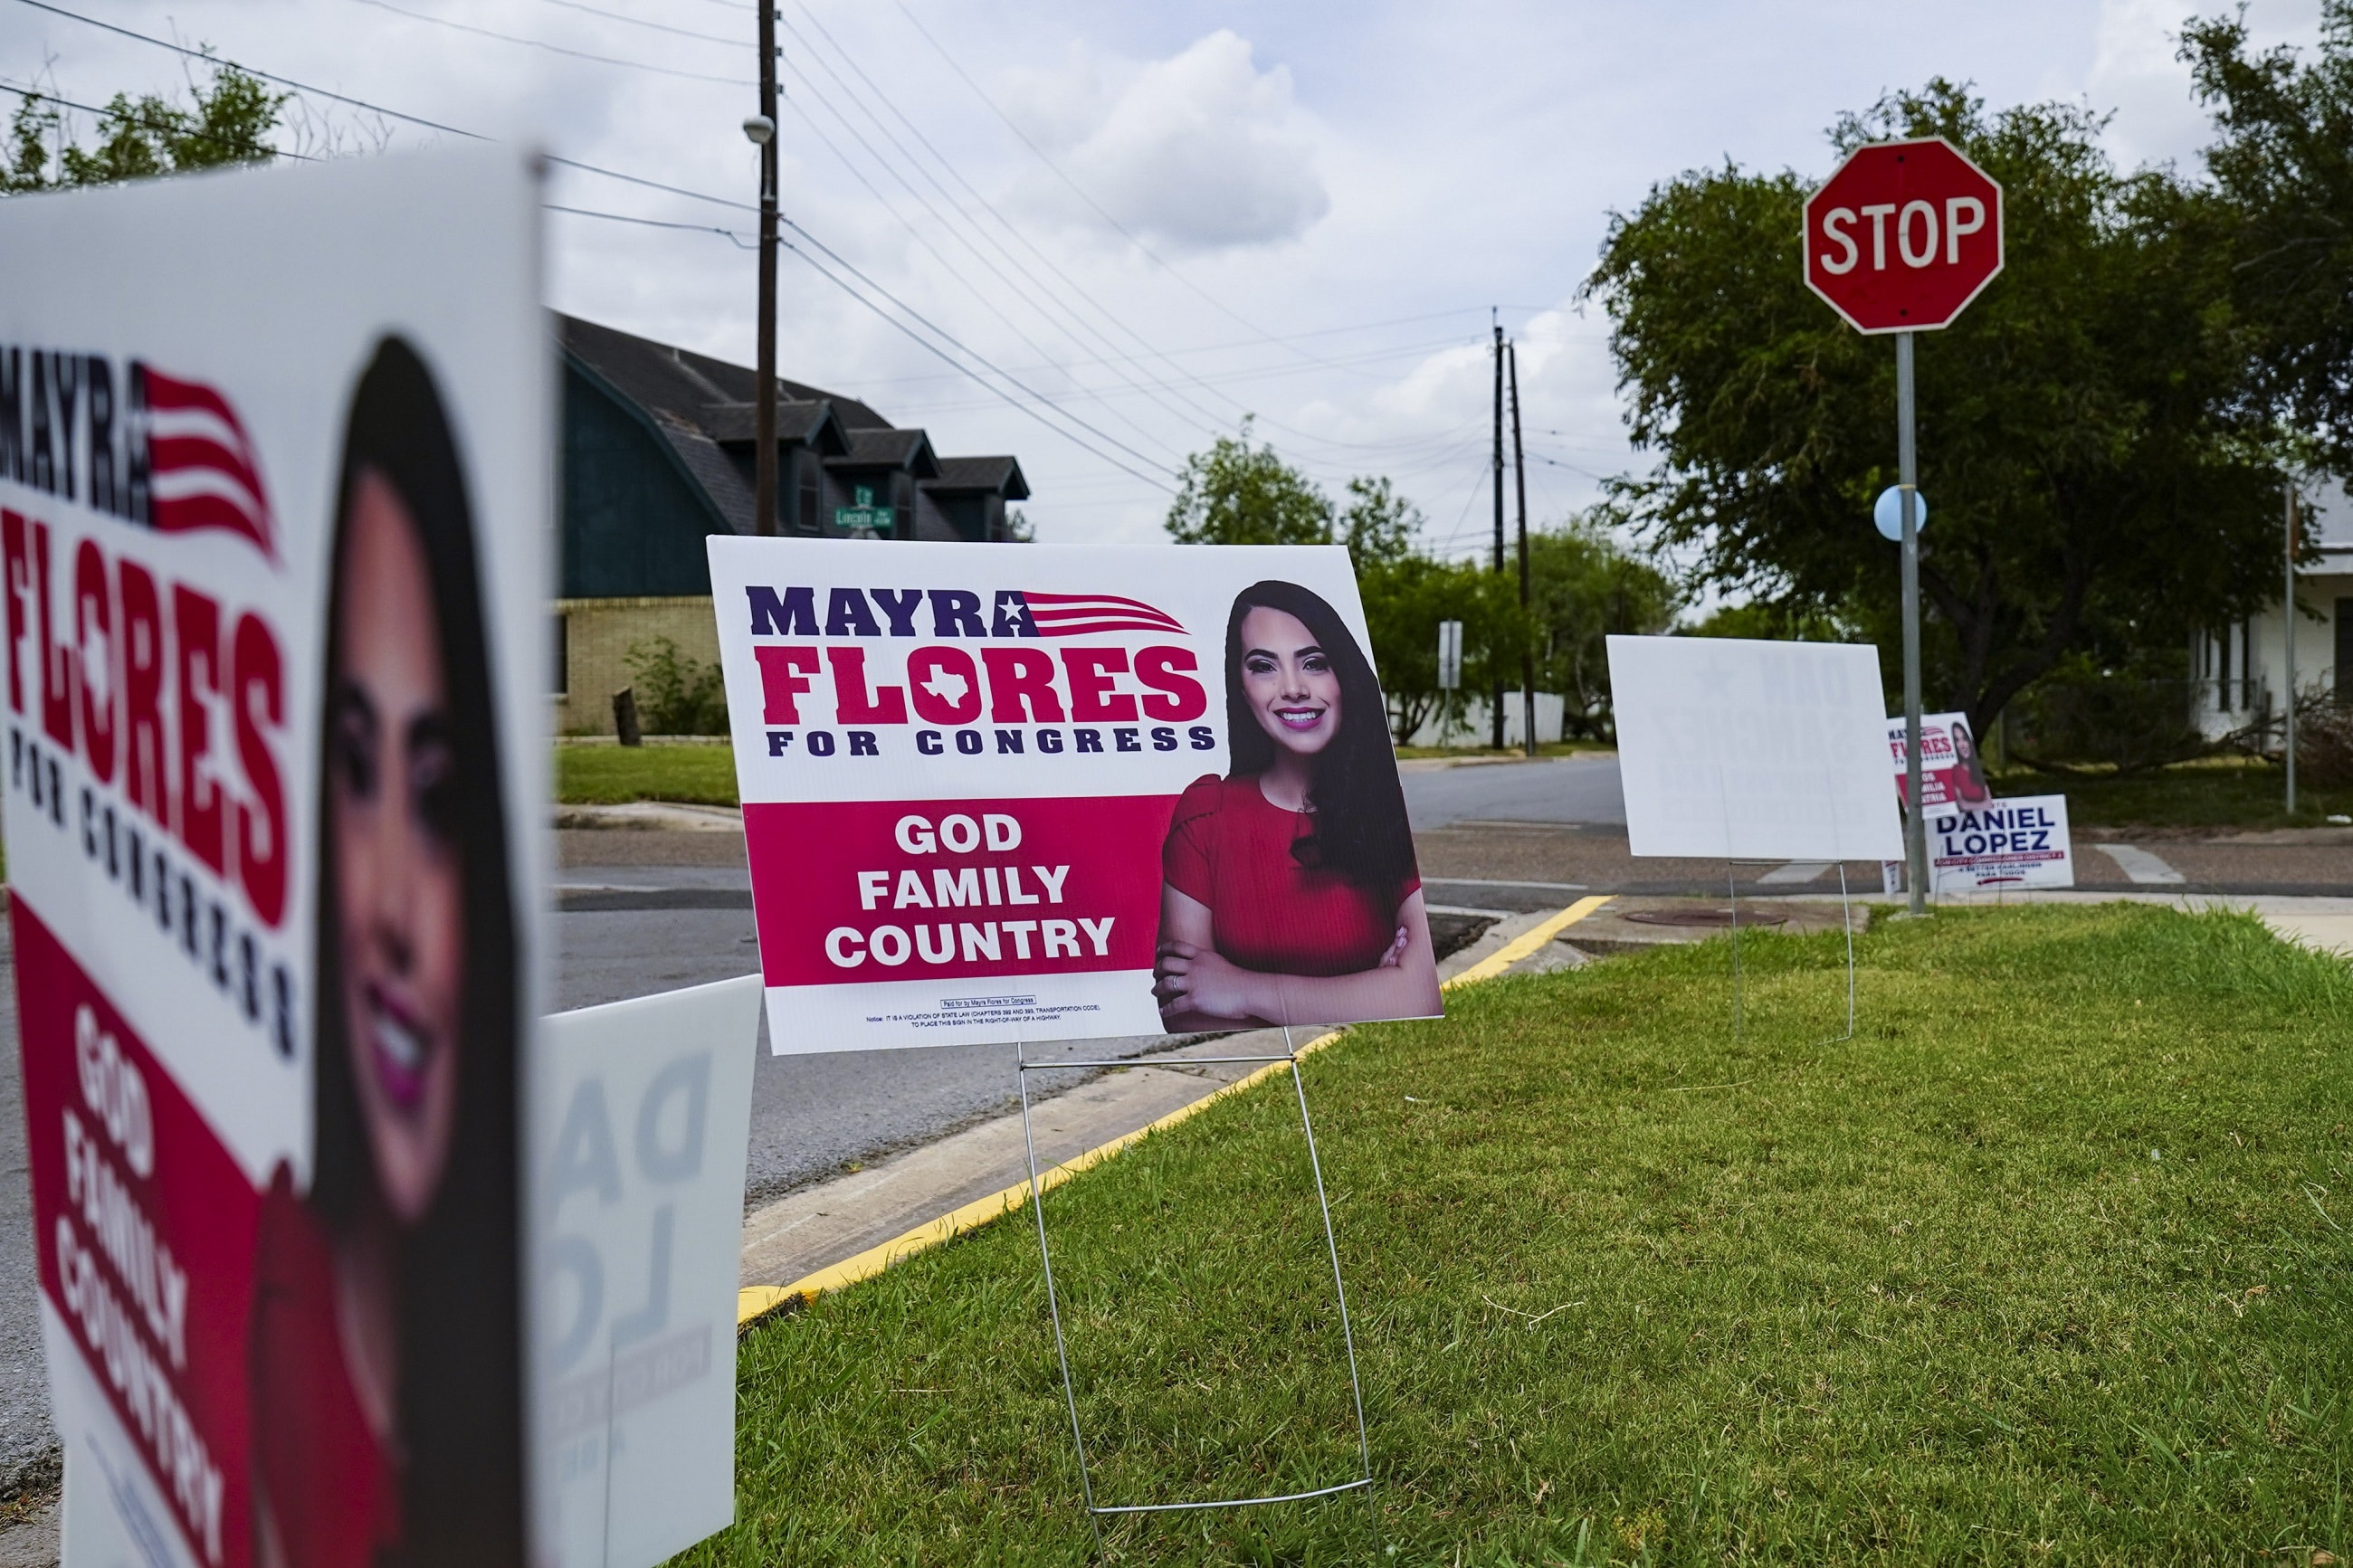 Republican Mayra Flores wins special congressional election in South Texas